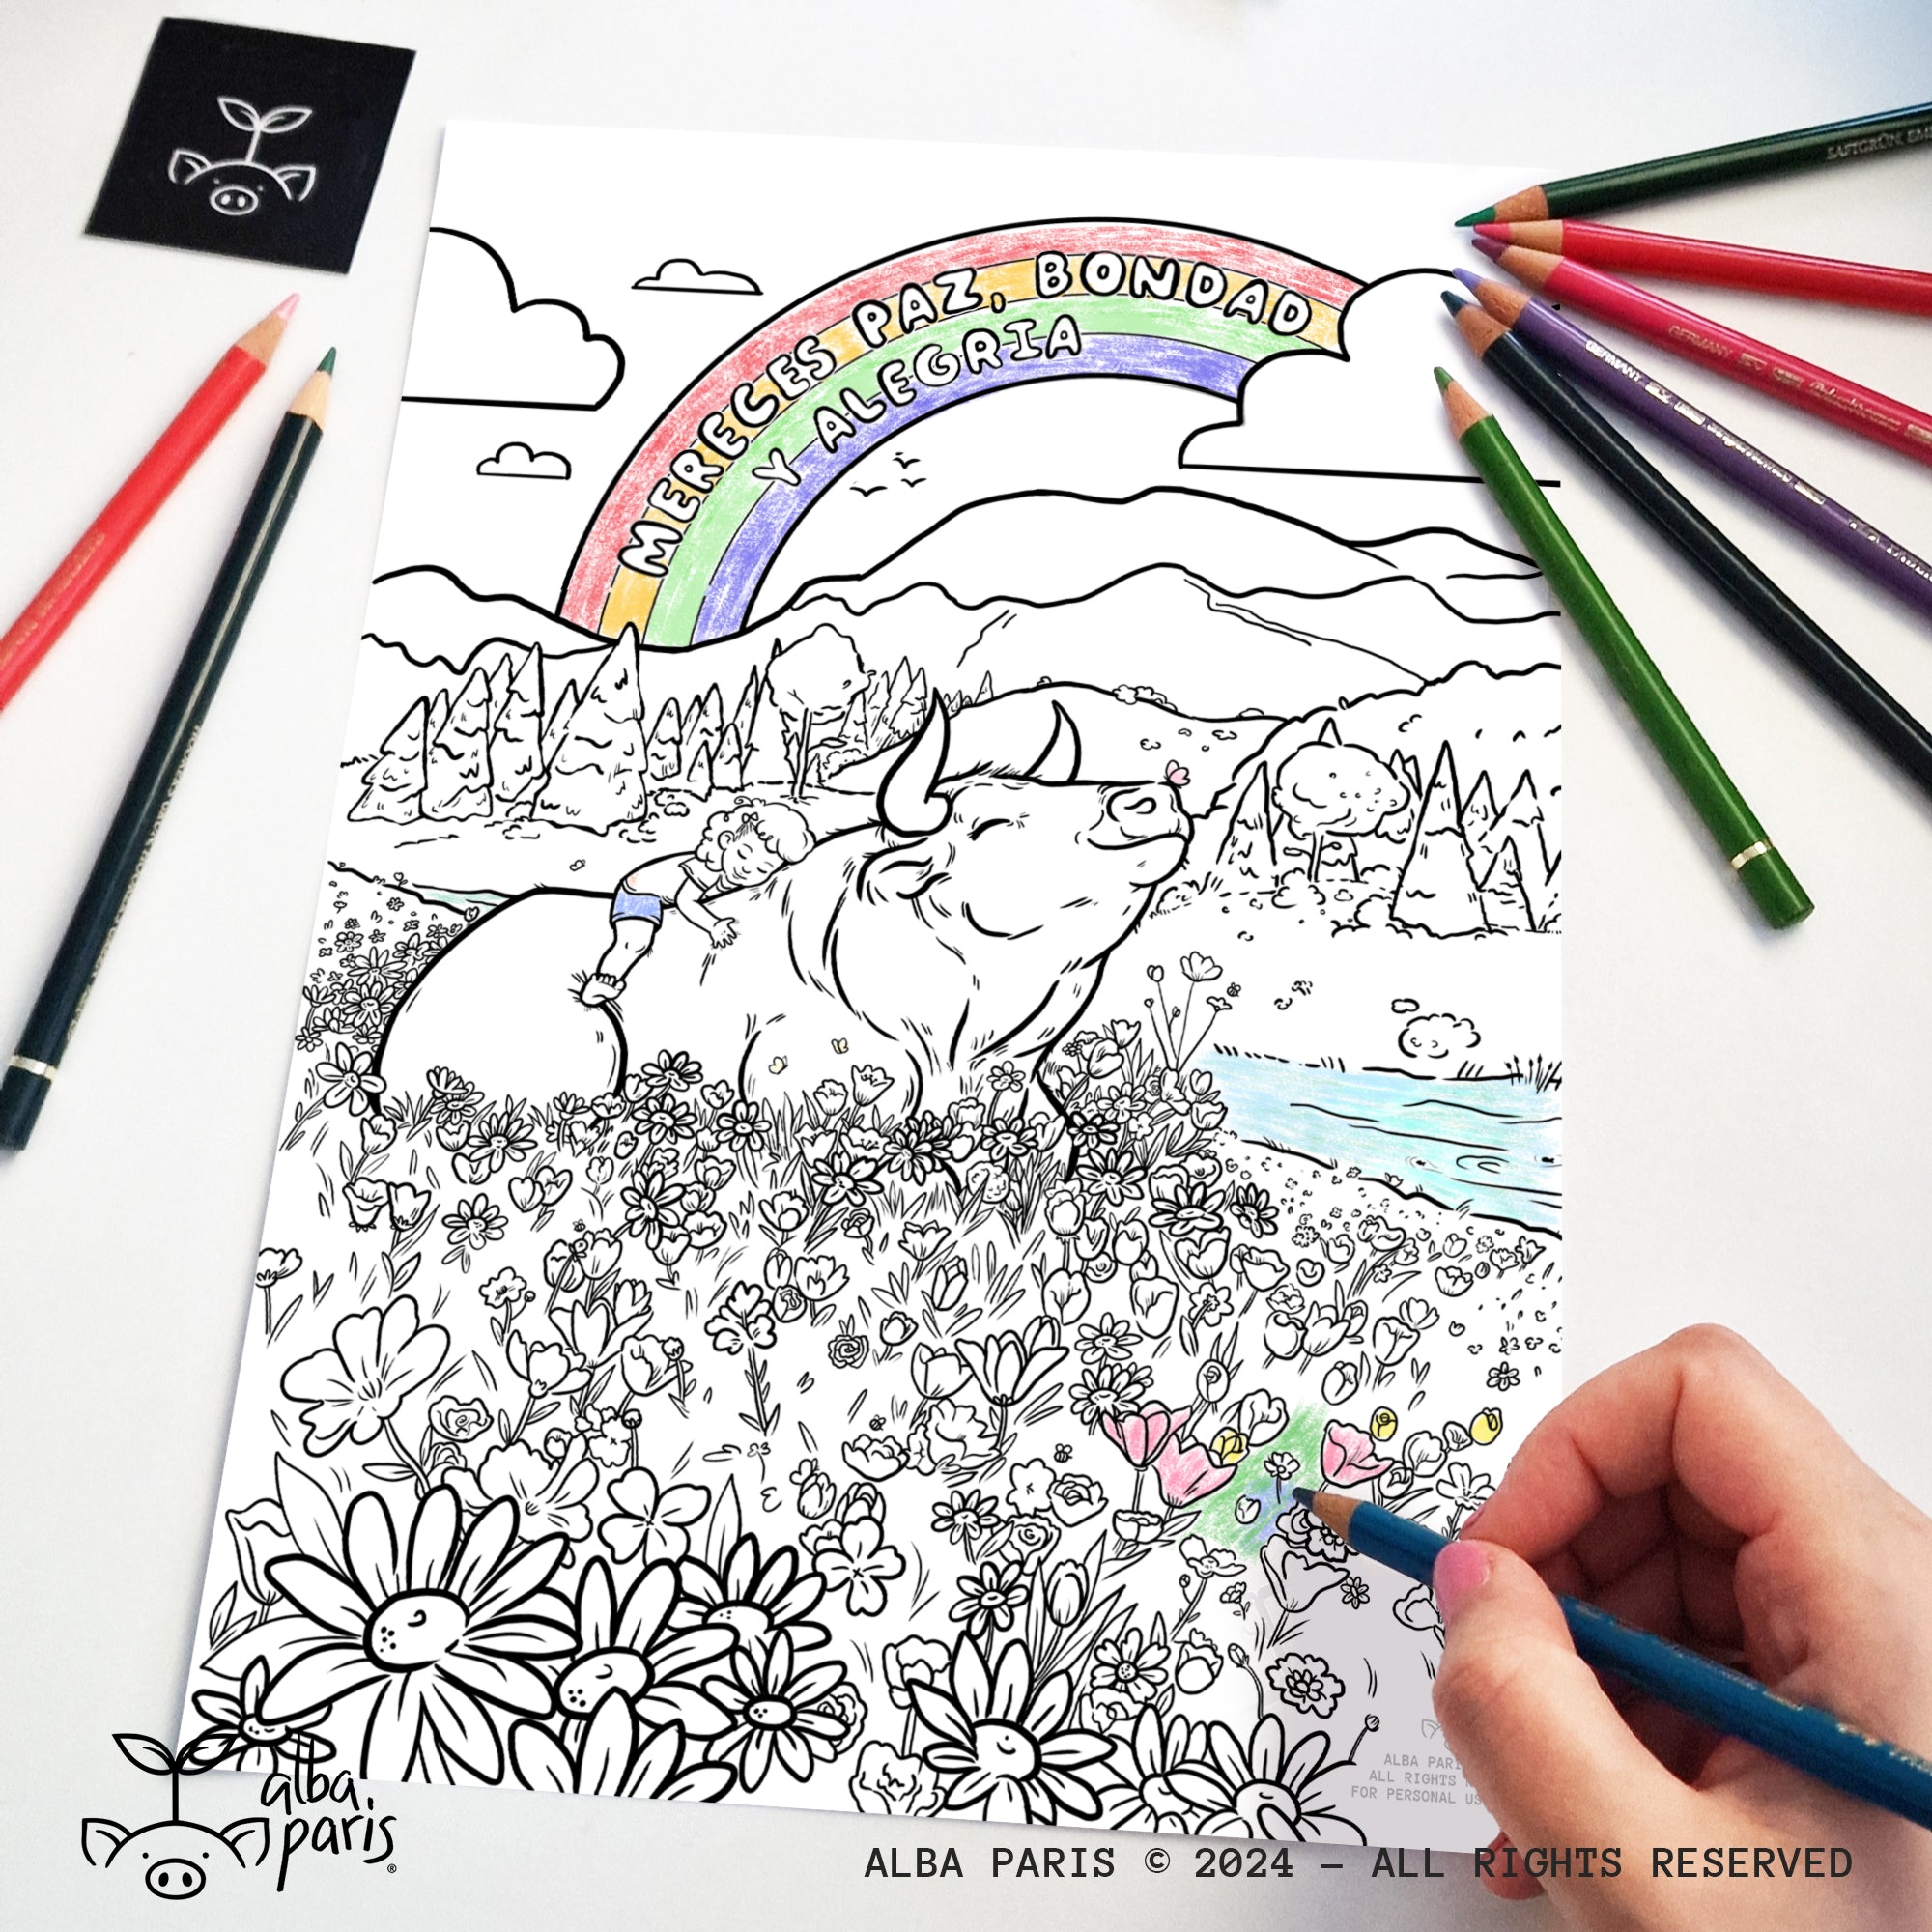 You Deserve Peace - Ban Bullfighting/Rodeos - Coloring Page (In English And Spanish)